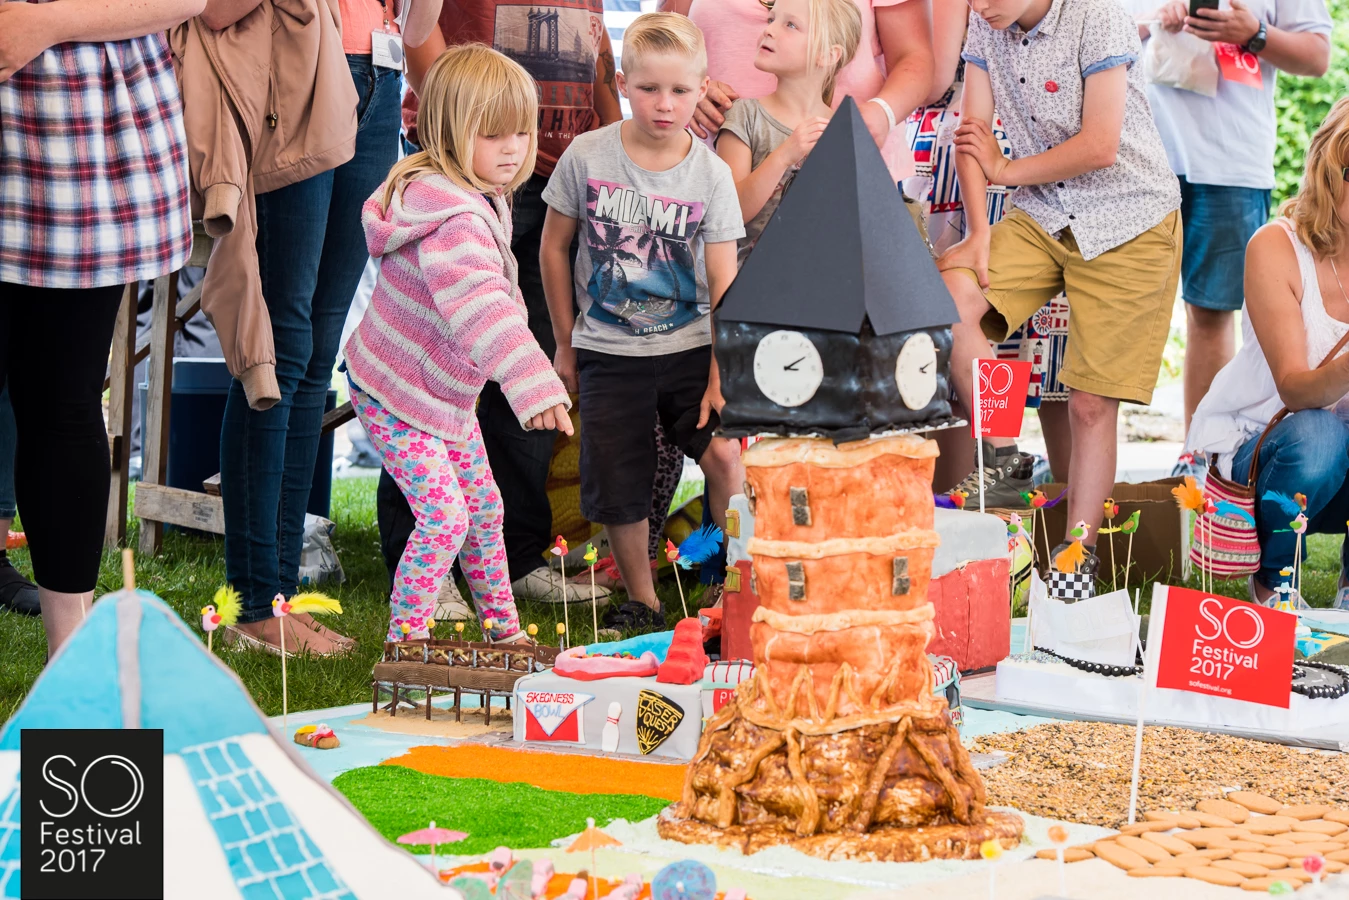 Cake Fest in Middlesbrough on 1 July - Free to enter and open to everyone